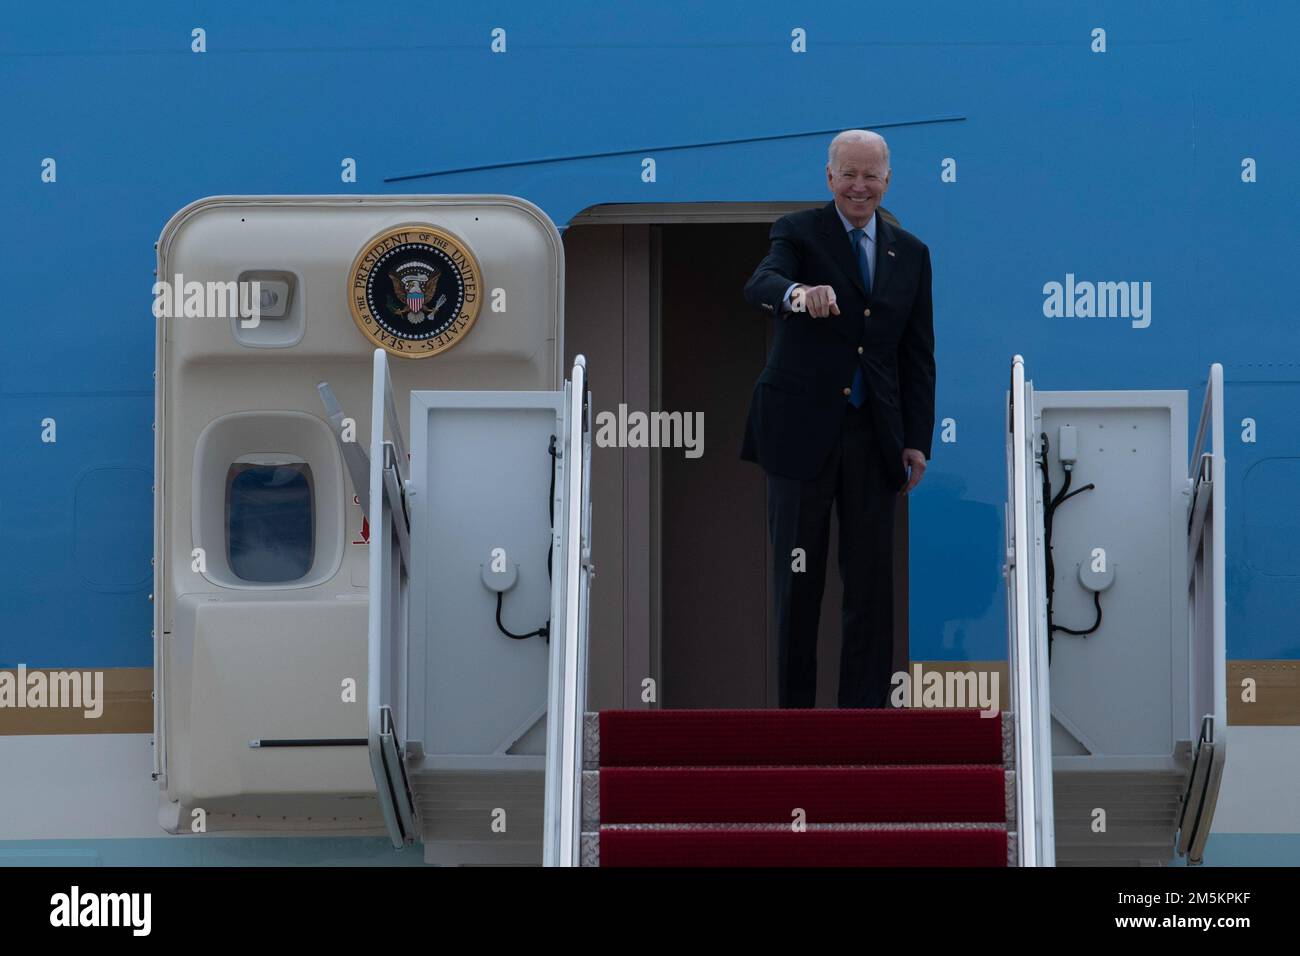 U.S. President Joe Biden boards Air Force One prior departing for his trip to Europe at Joint Base Andrews, Md., March 23, 2022. Stock Photo